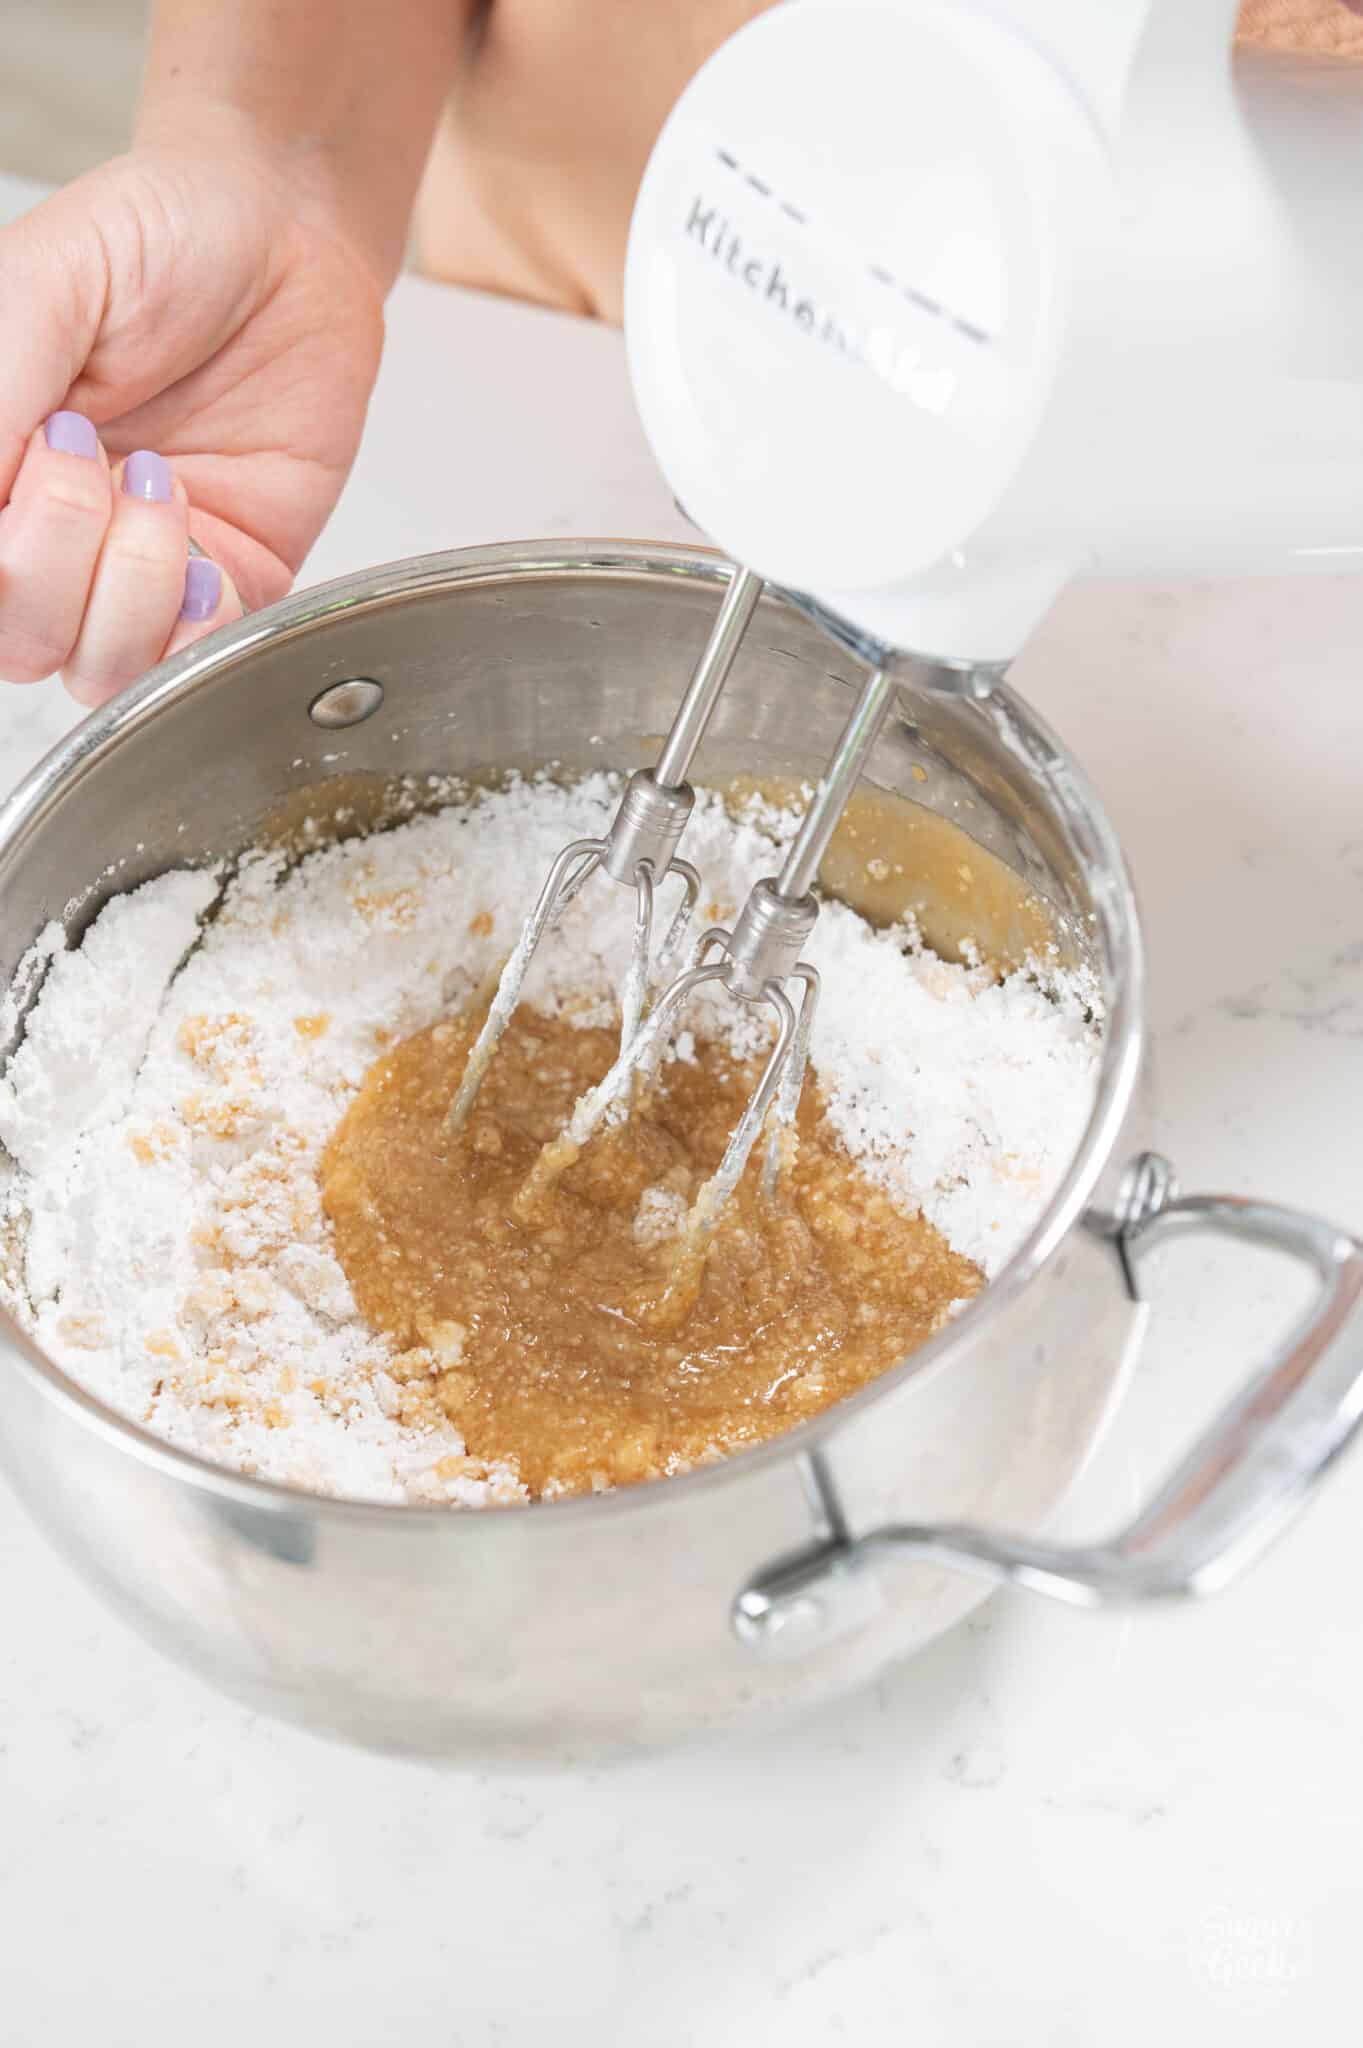 hand using hand mixer to whisk together powdered sugar and peanut butter glaze.